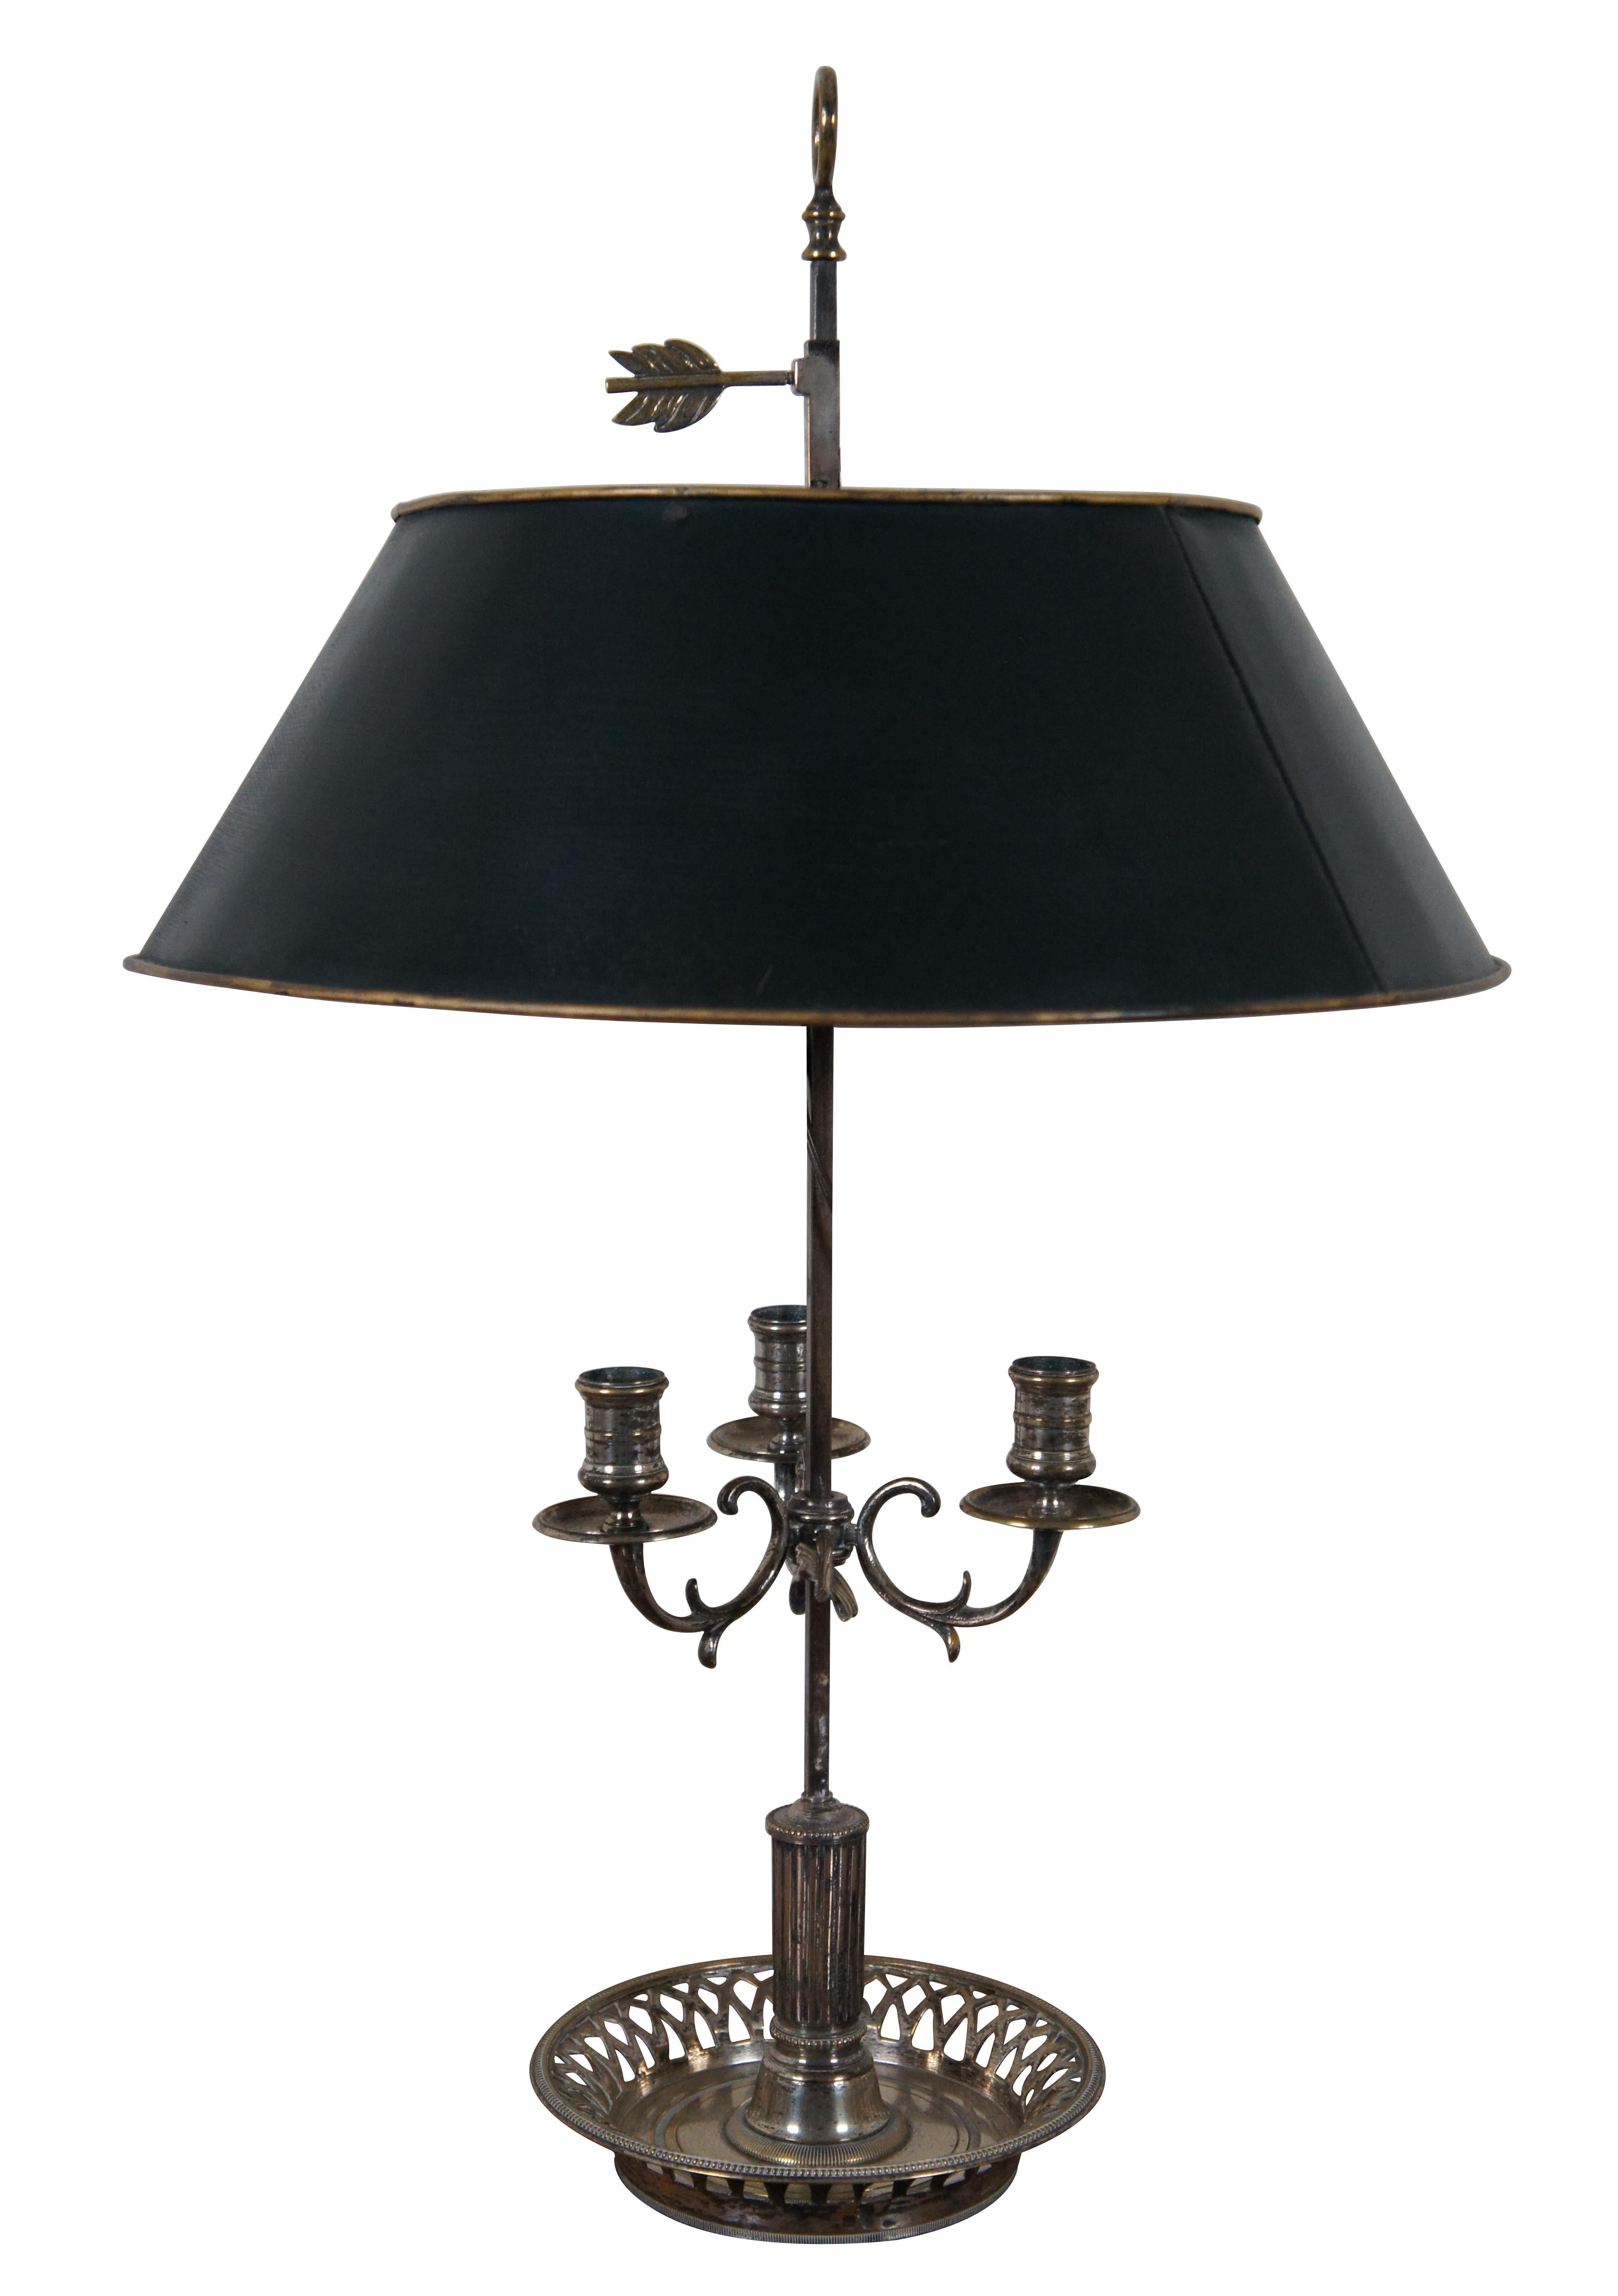 Antique French Bouillotte Directoire 3 Light Pierced Tole Candelabra Lamp In Good Condition For Sale In Dayton, OH